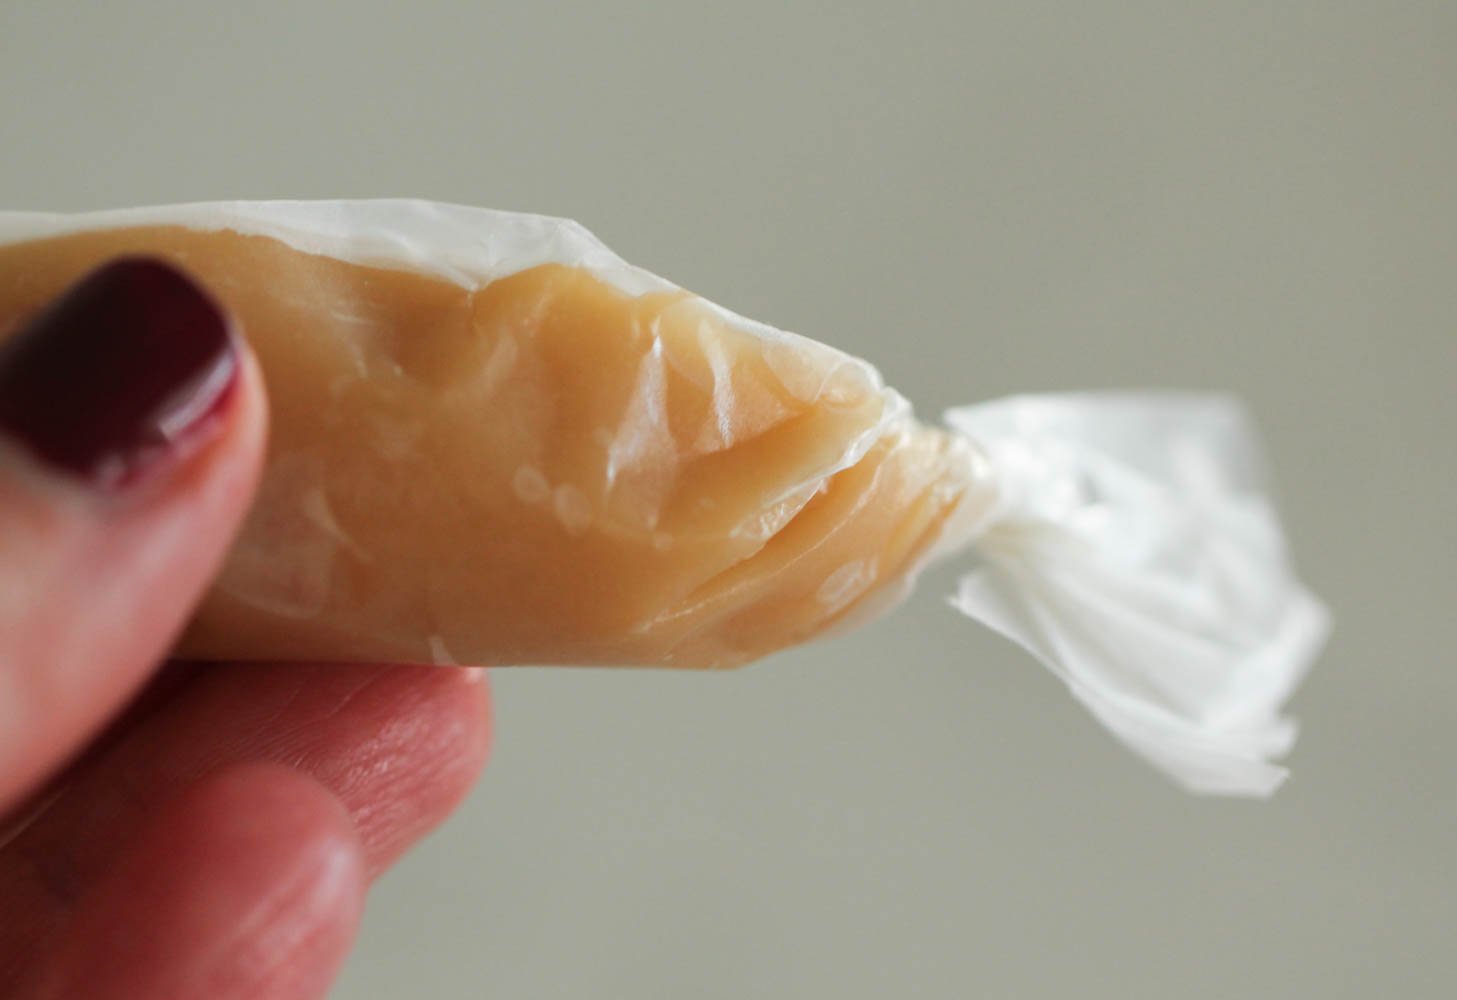 homemade caramel wrapped up in wax paper